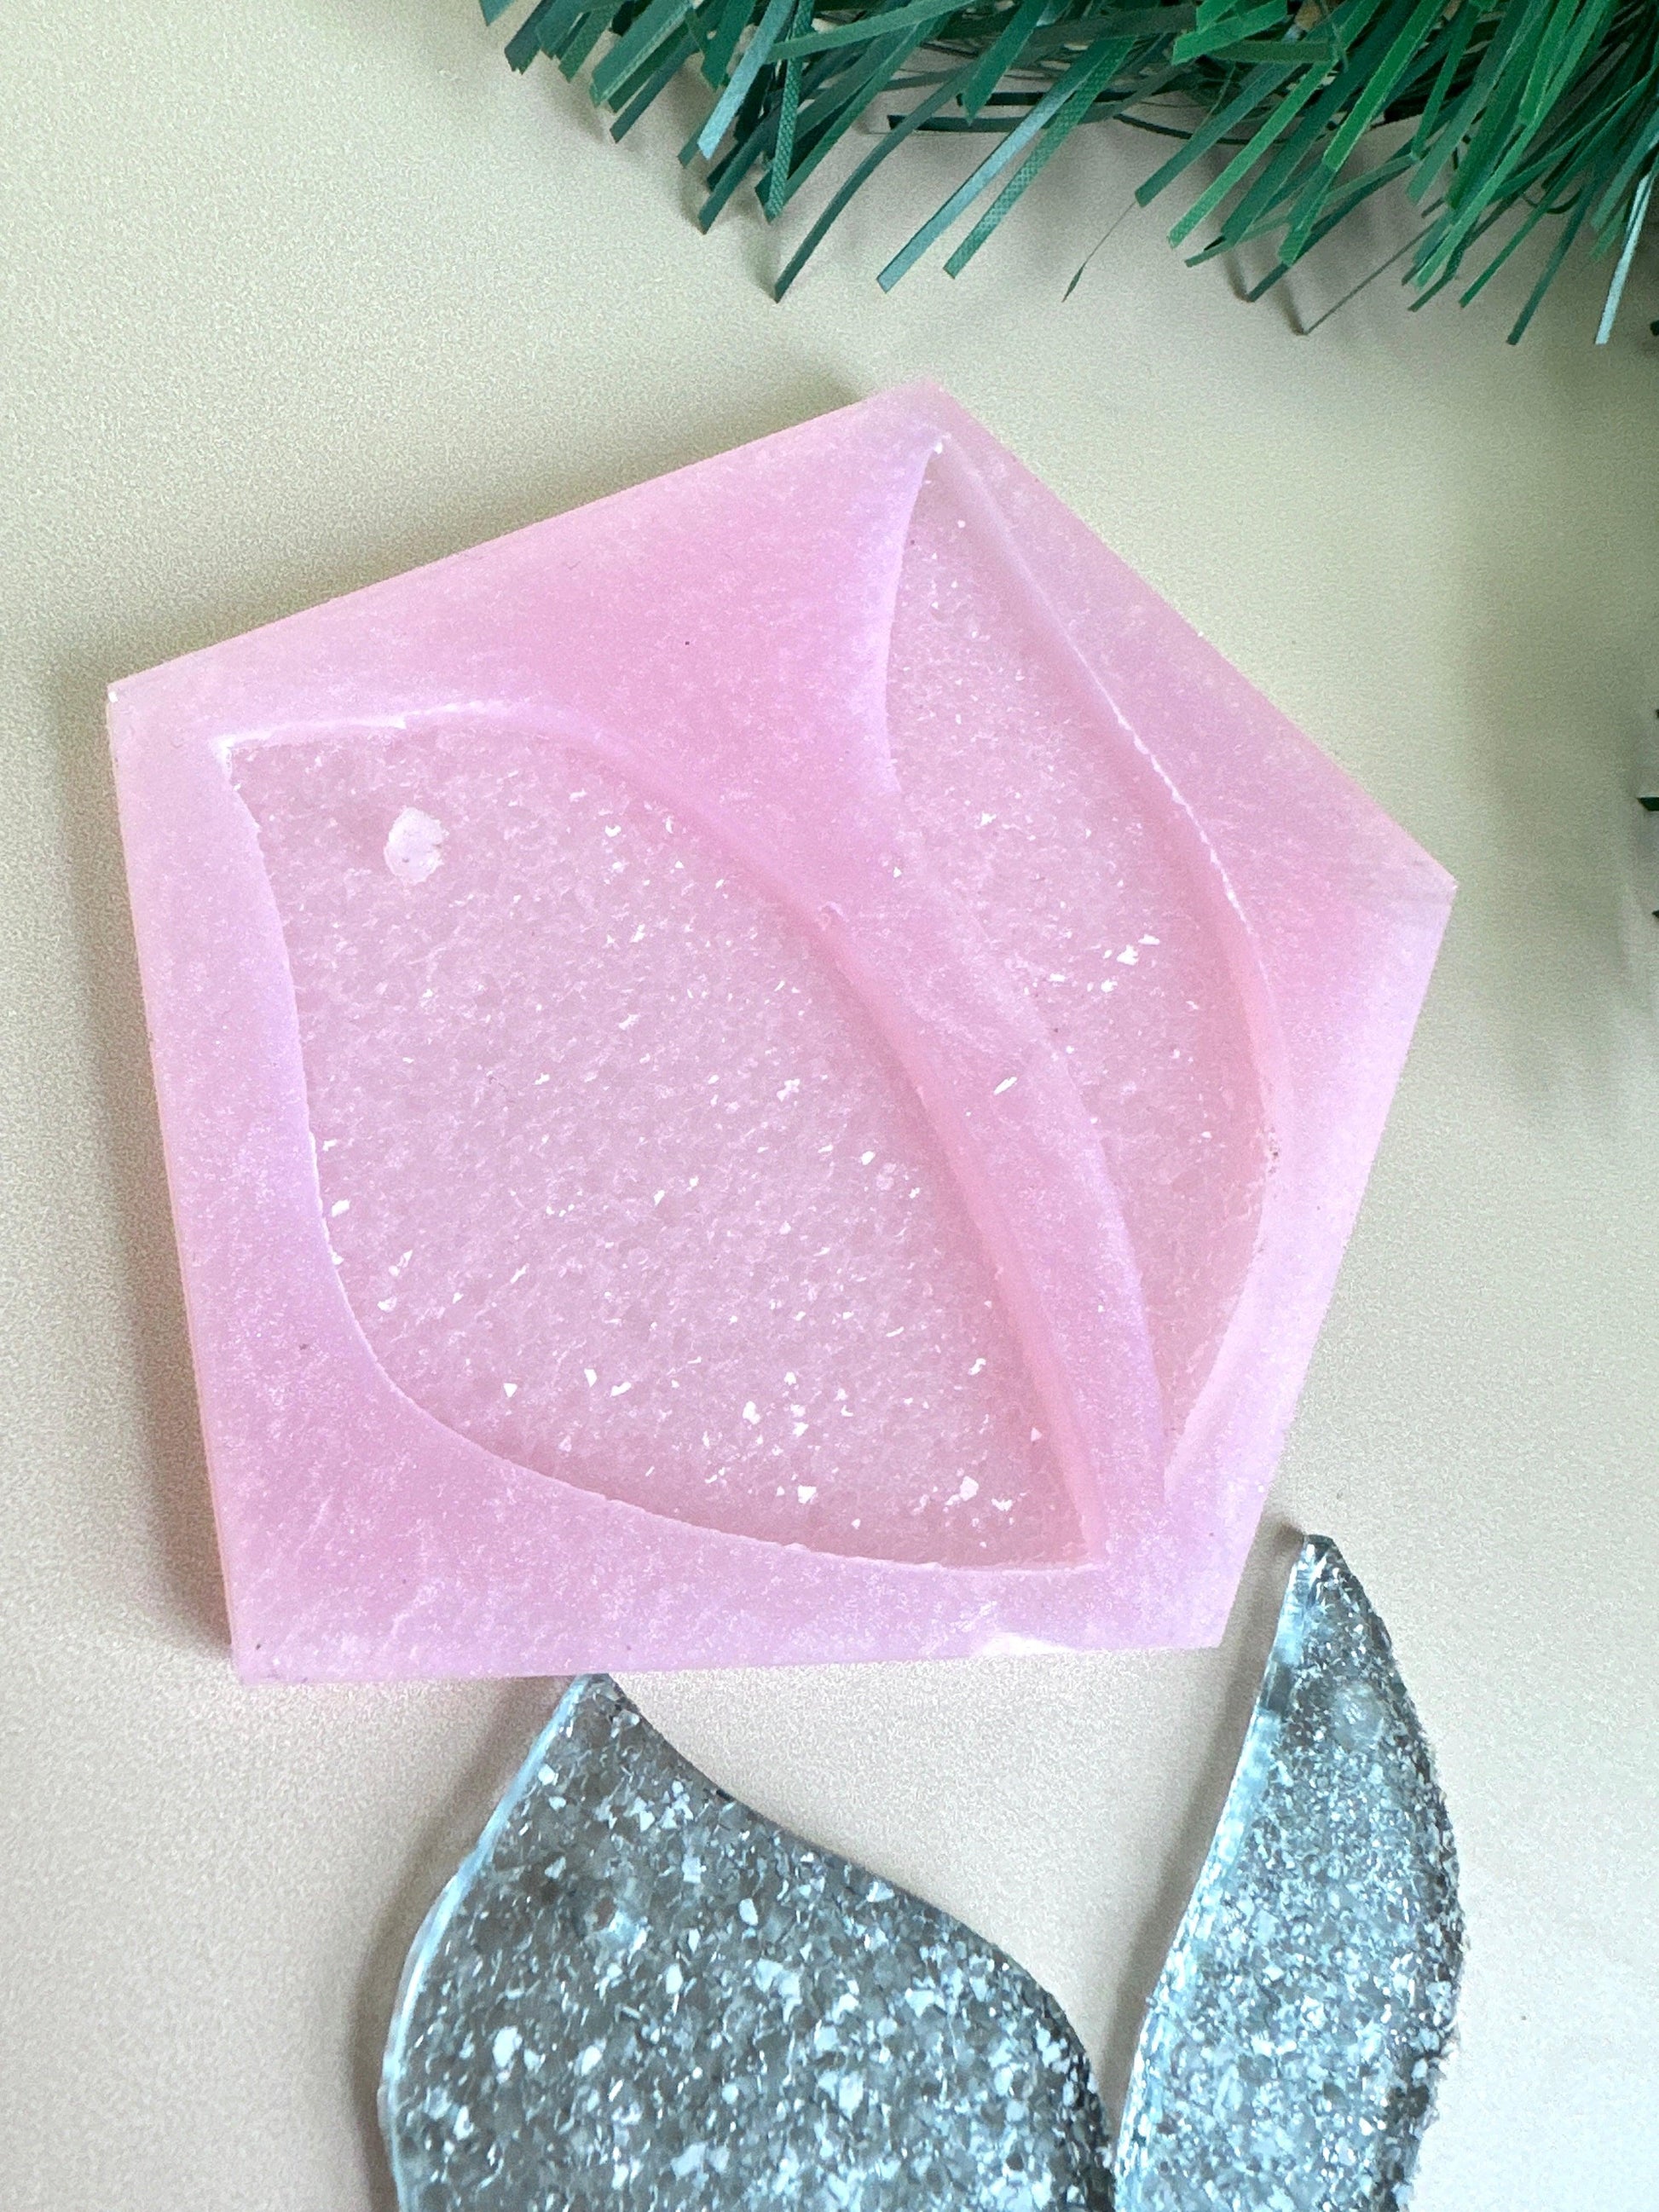 Holiday Crystal 2 Sheets Silicone Mold - Christmas Tree Ornament Making, Great for Festive Decoration, Perfect Christmas Present for Crafters - Ideas Decor Shop